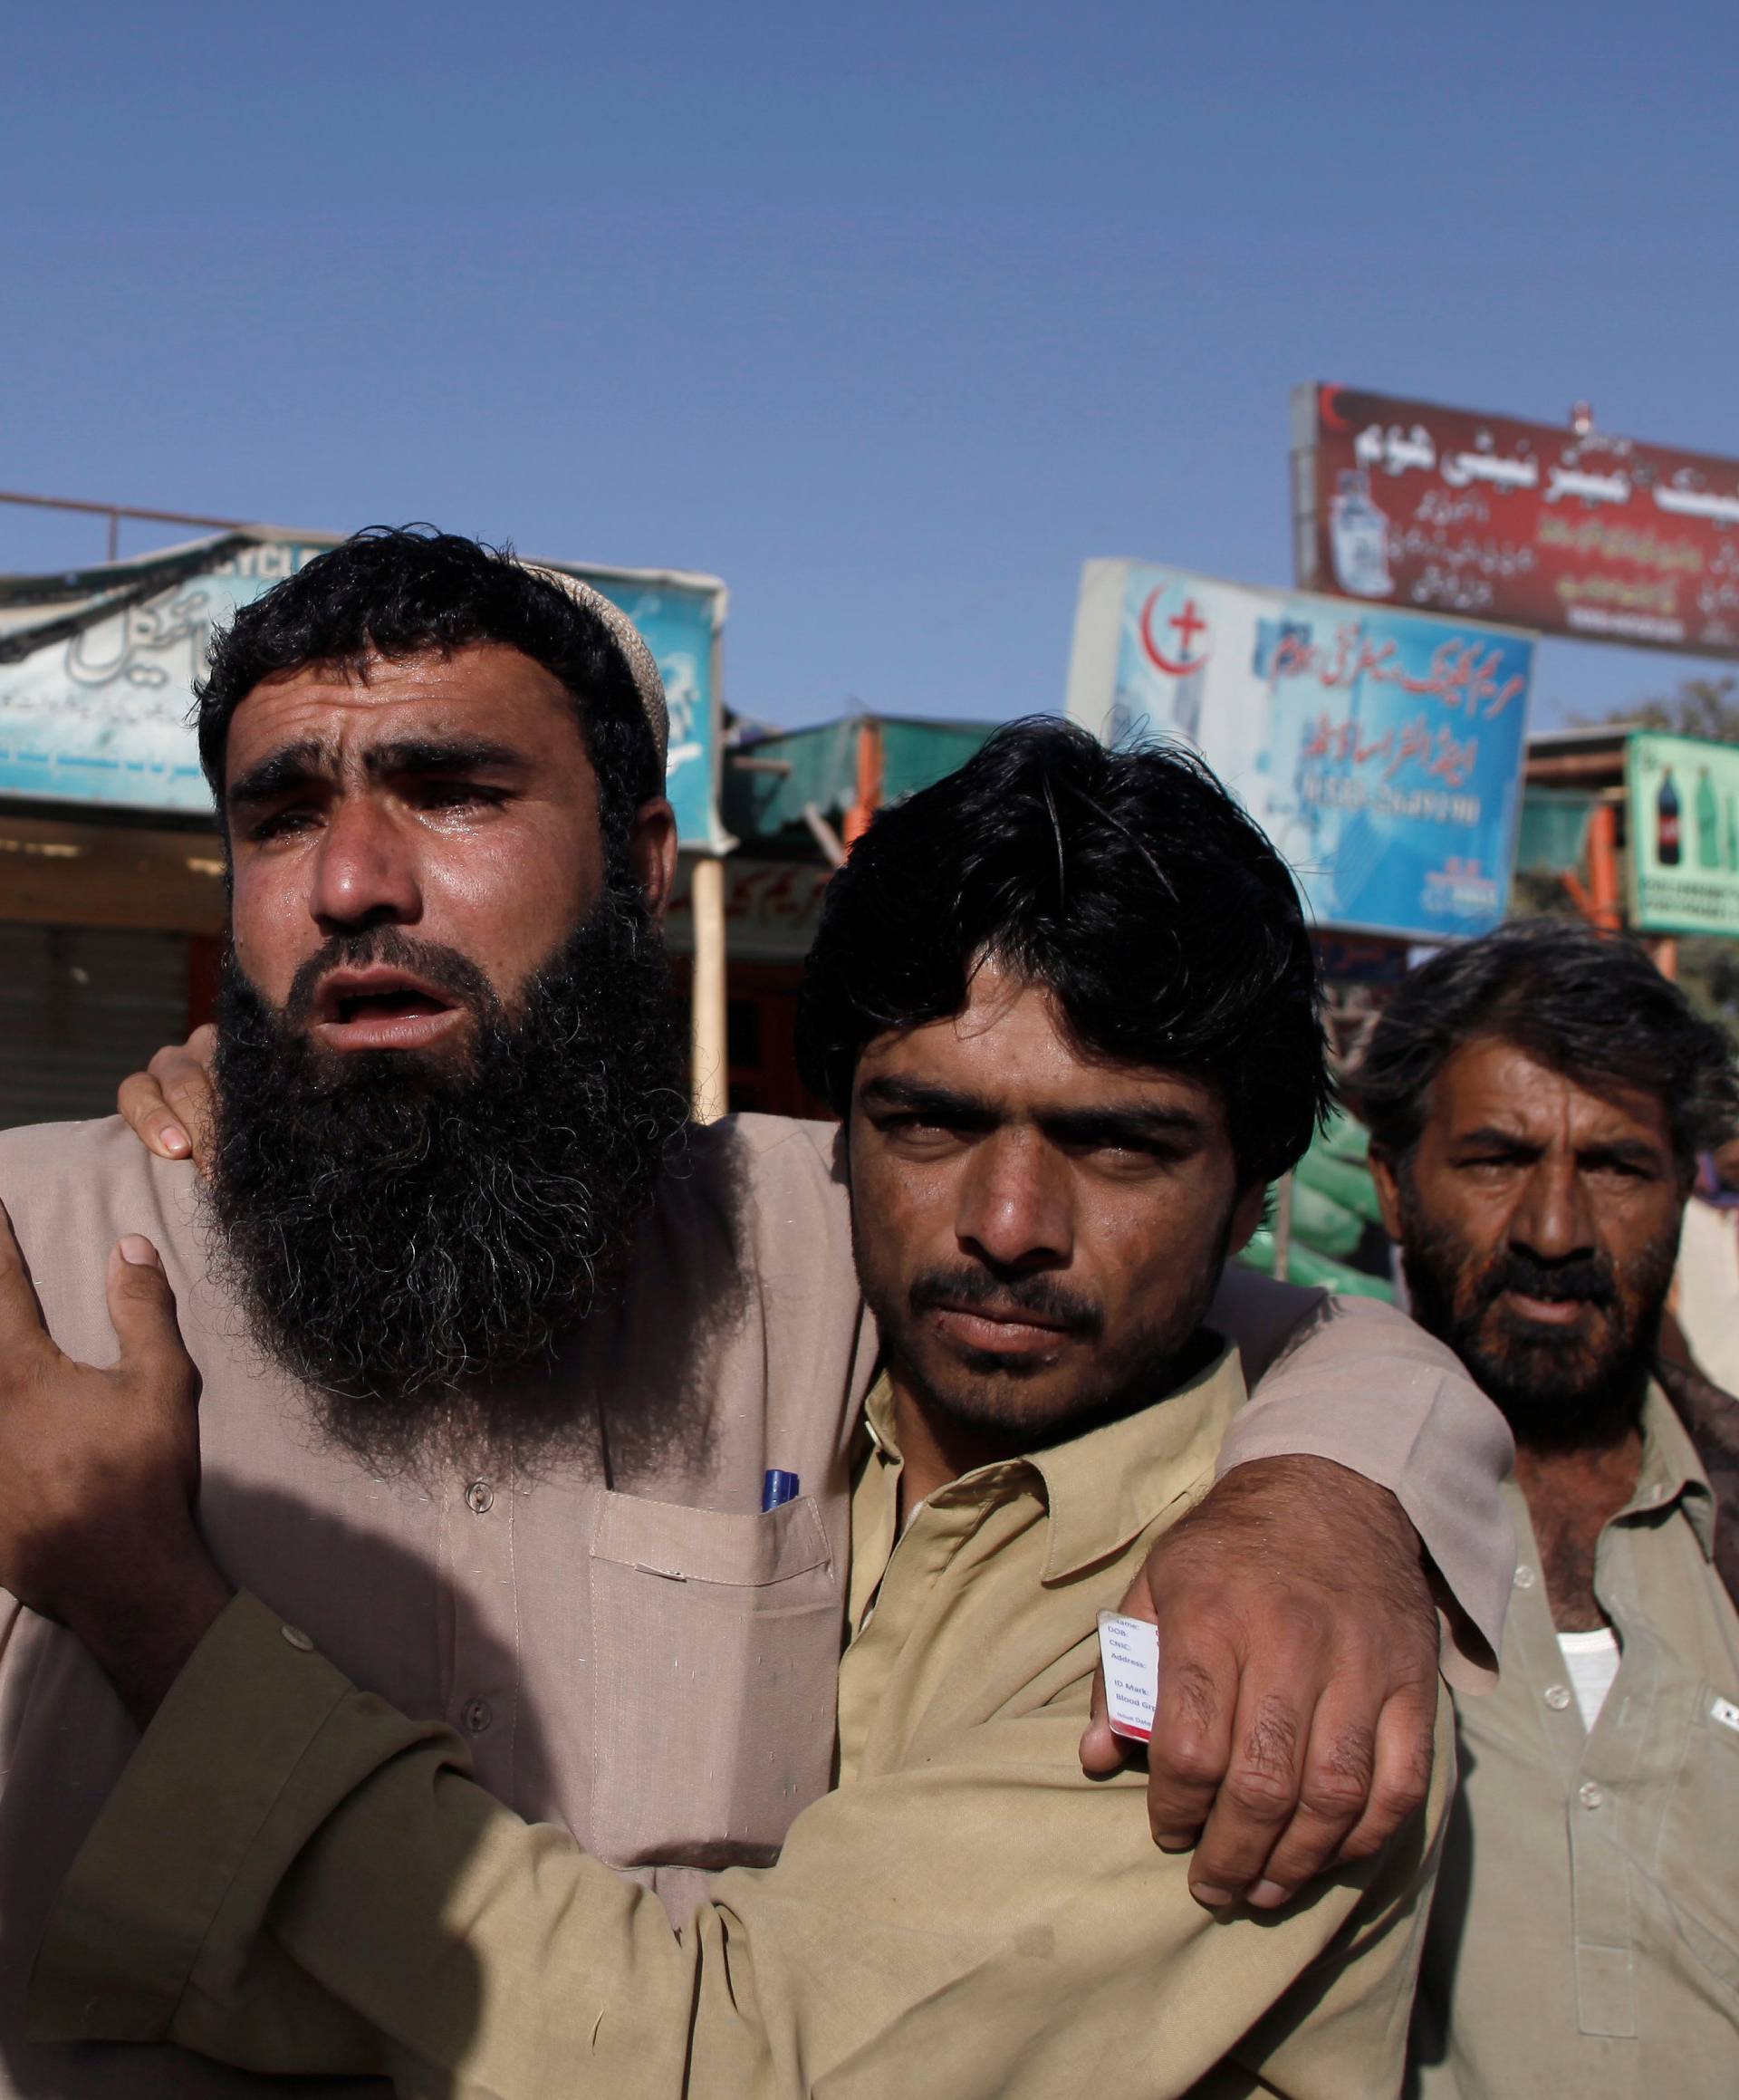 Relatives of police cadets wait for word outside the Police Training Center after an attack on the center in Quetta